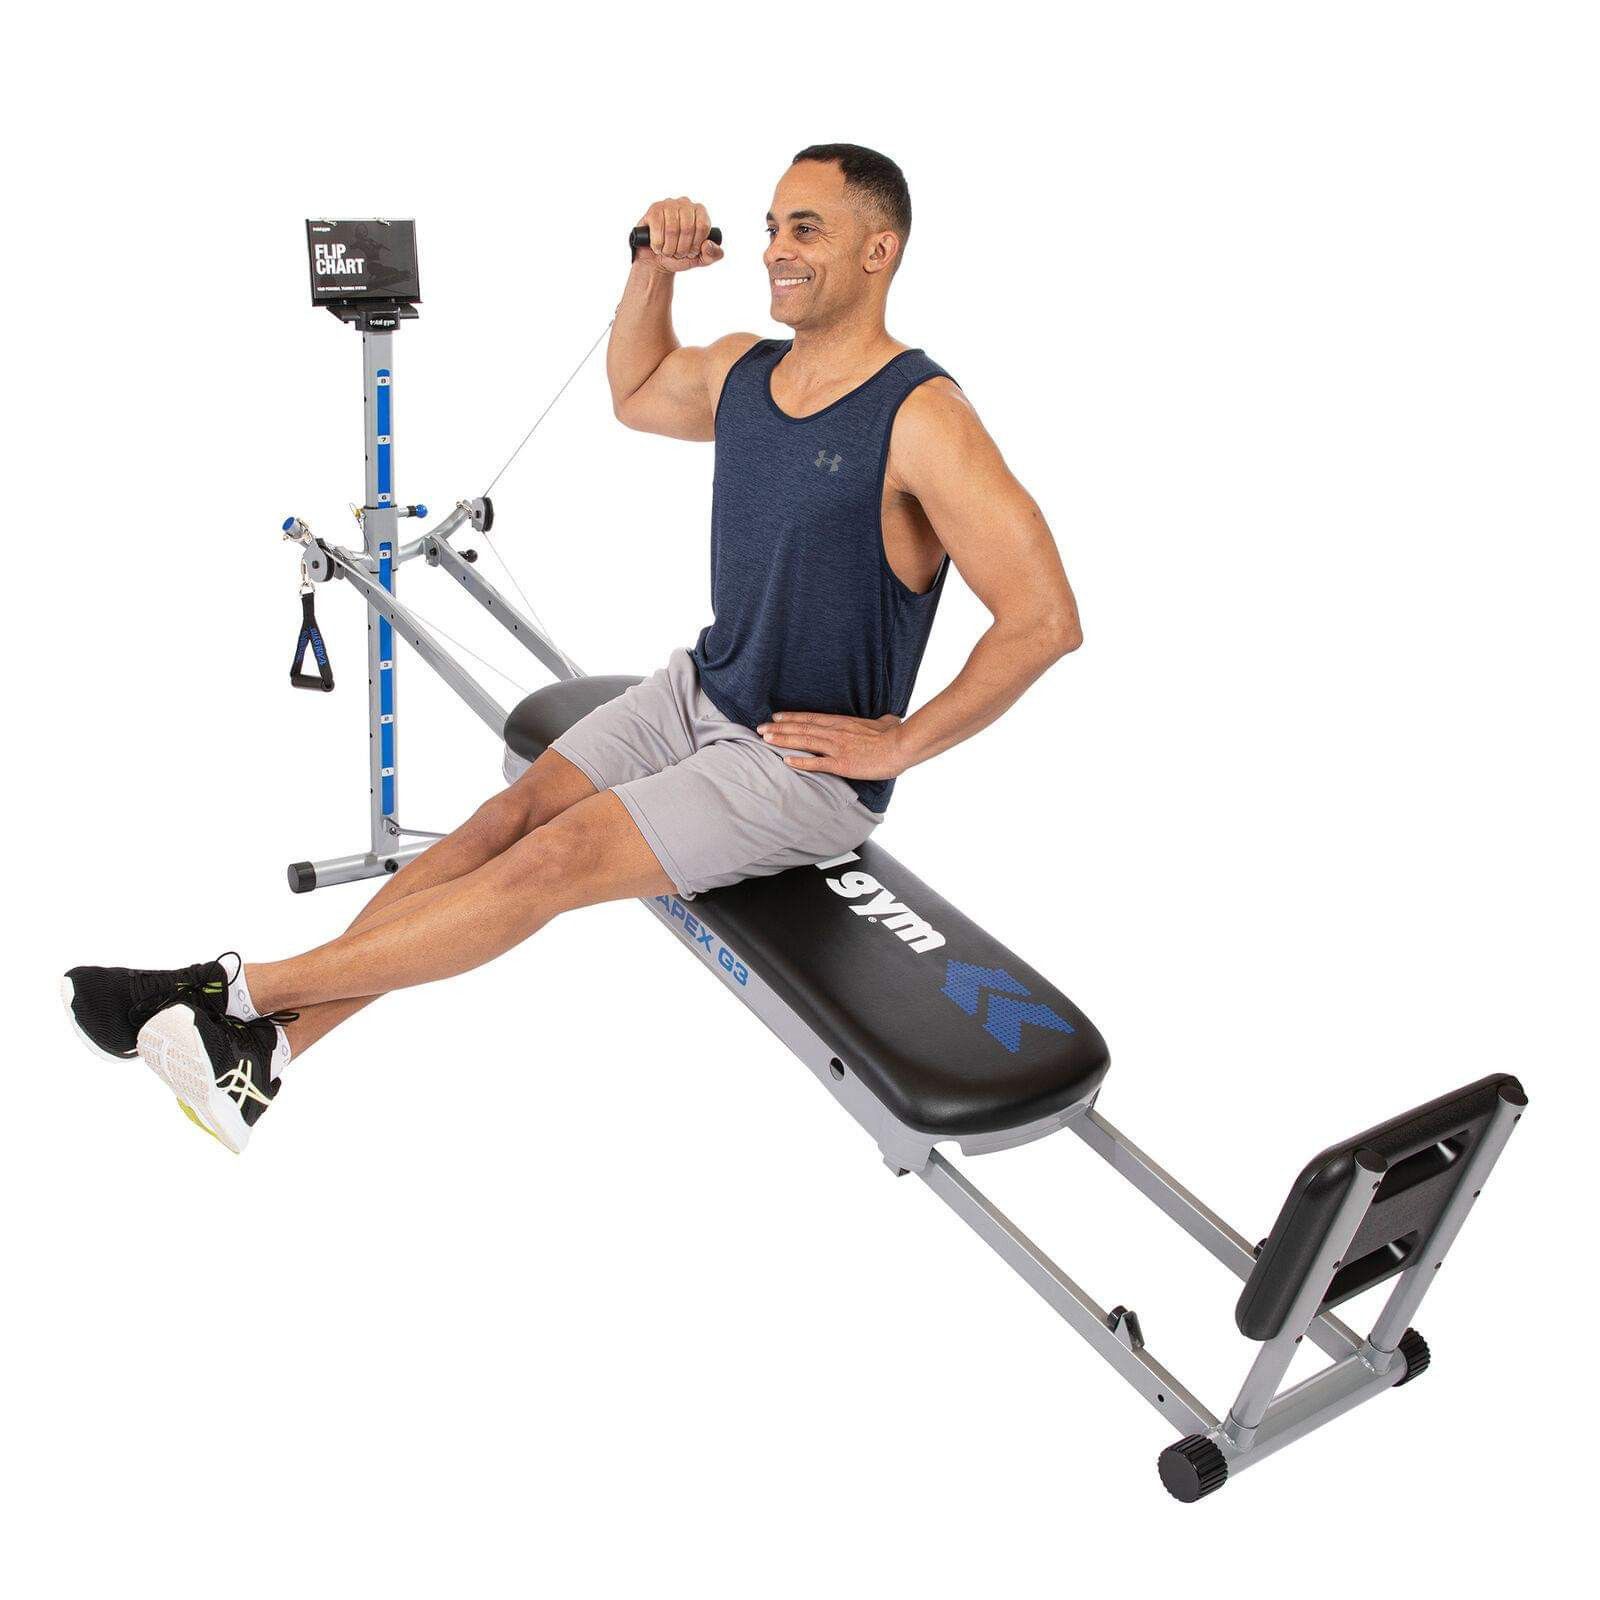 NEW Incline Weight Training Home Fitness Indoor Workout